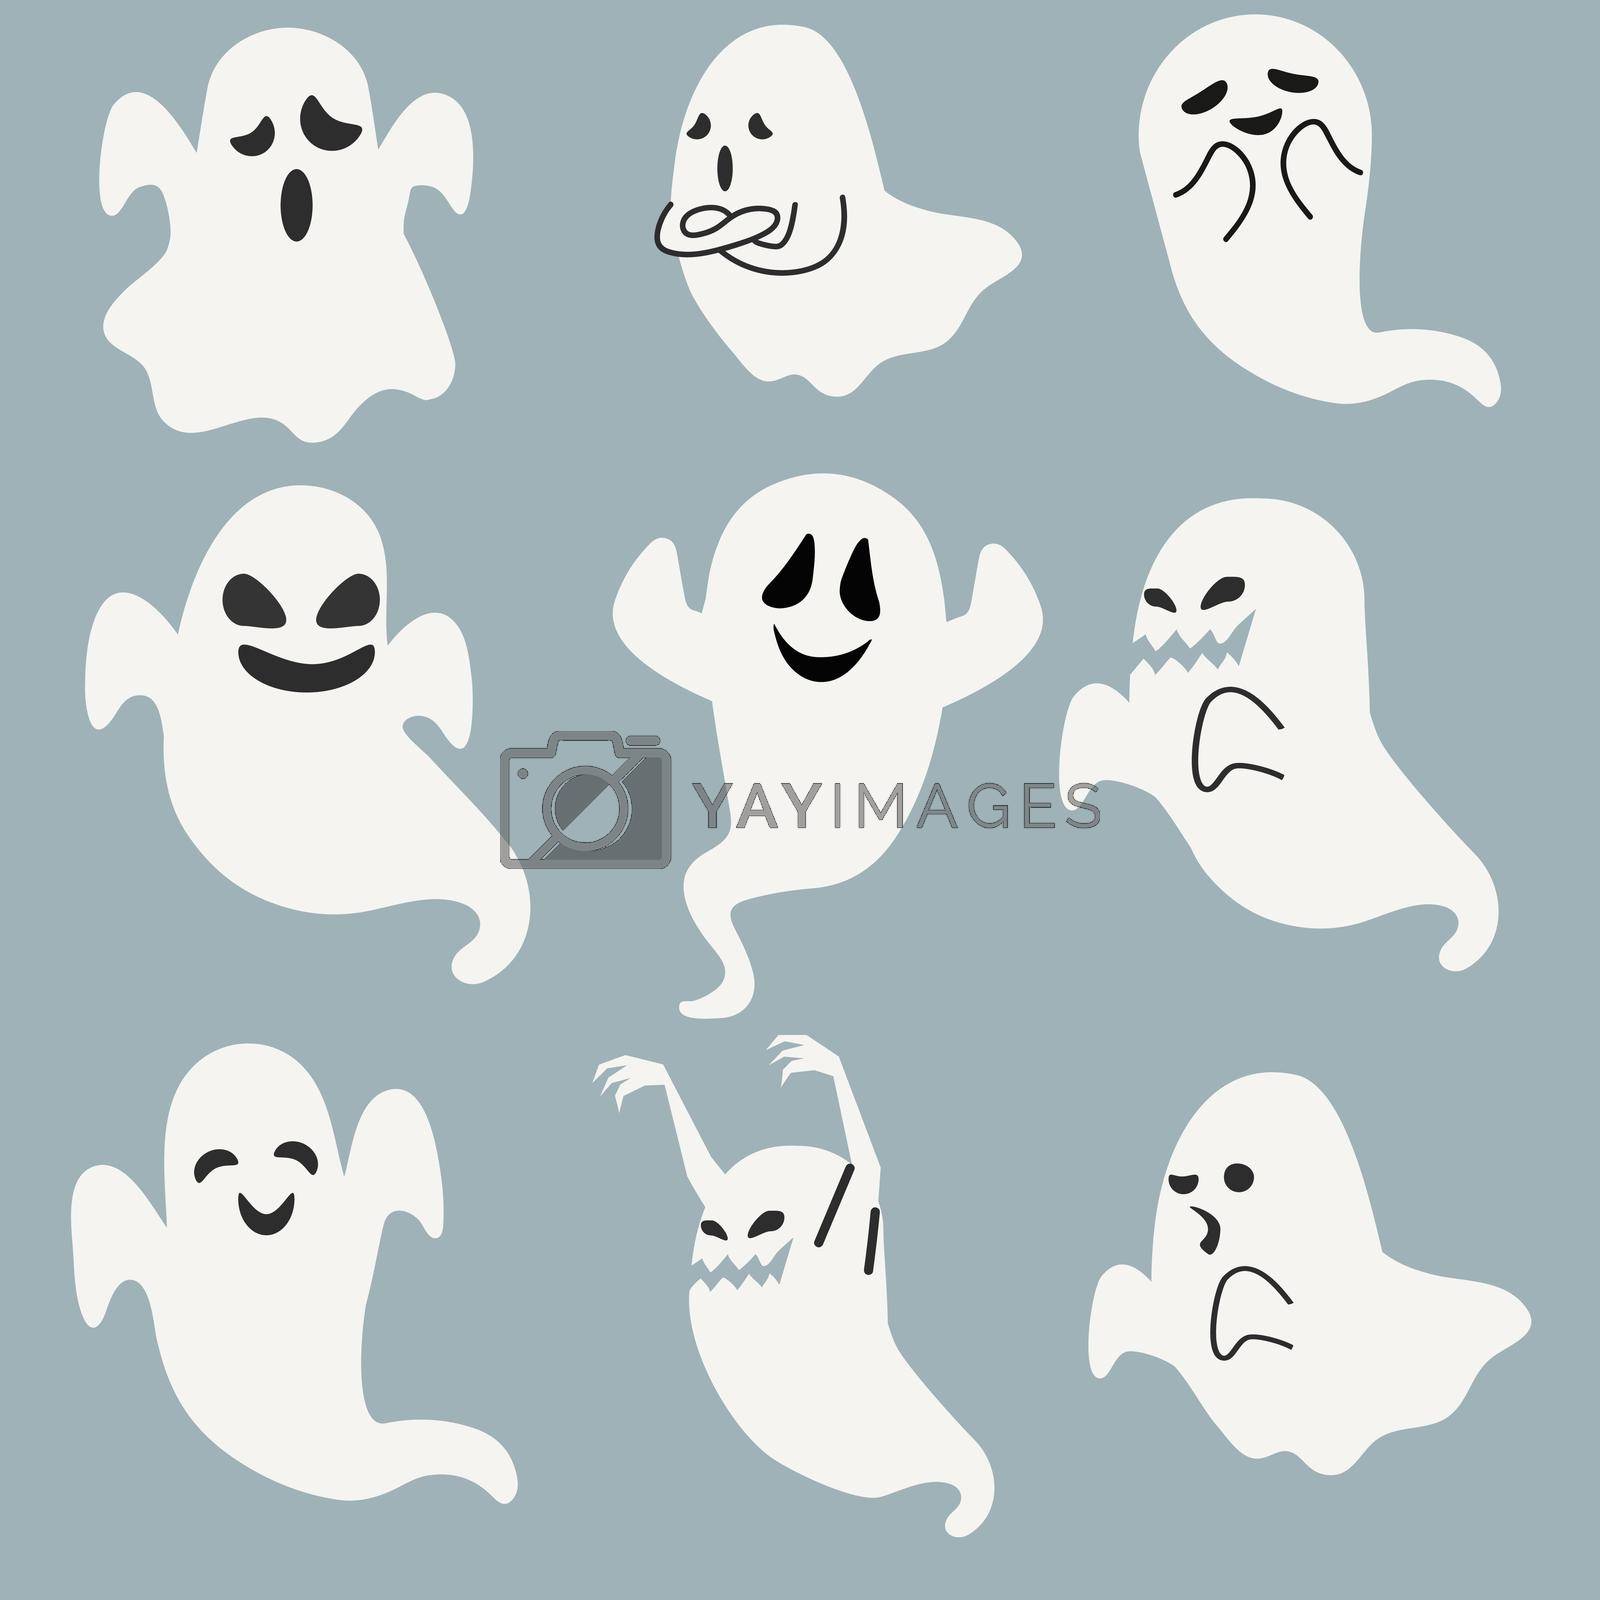 Royalty free image of Set of halloween ghosts  Spooky cartoon by focus_bell